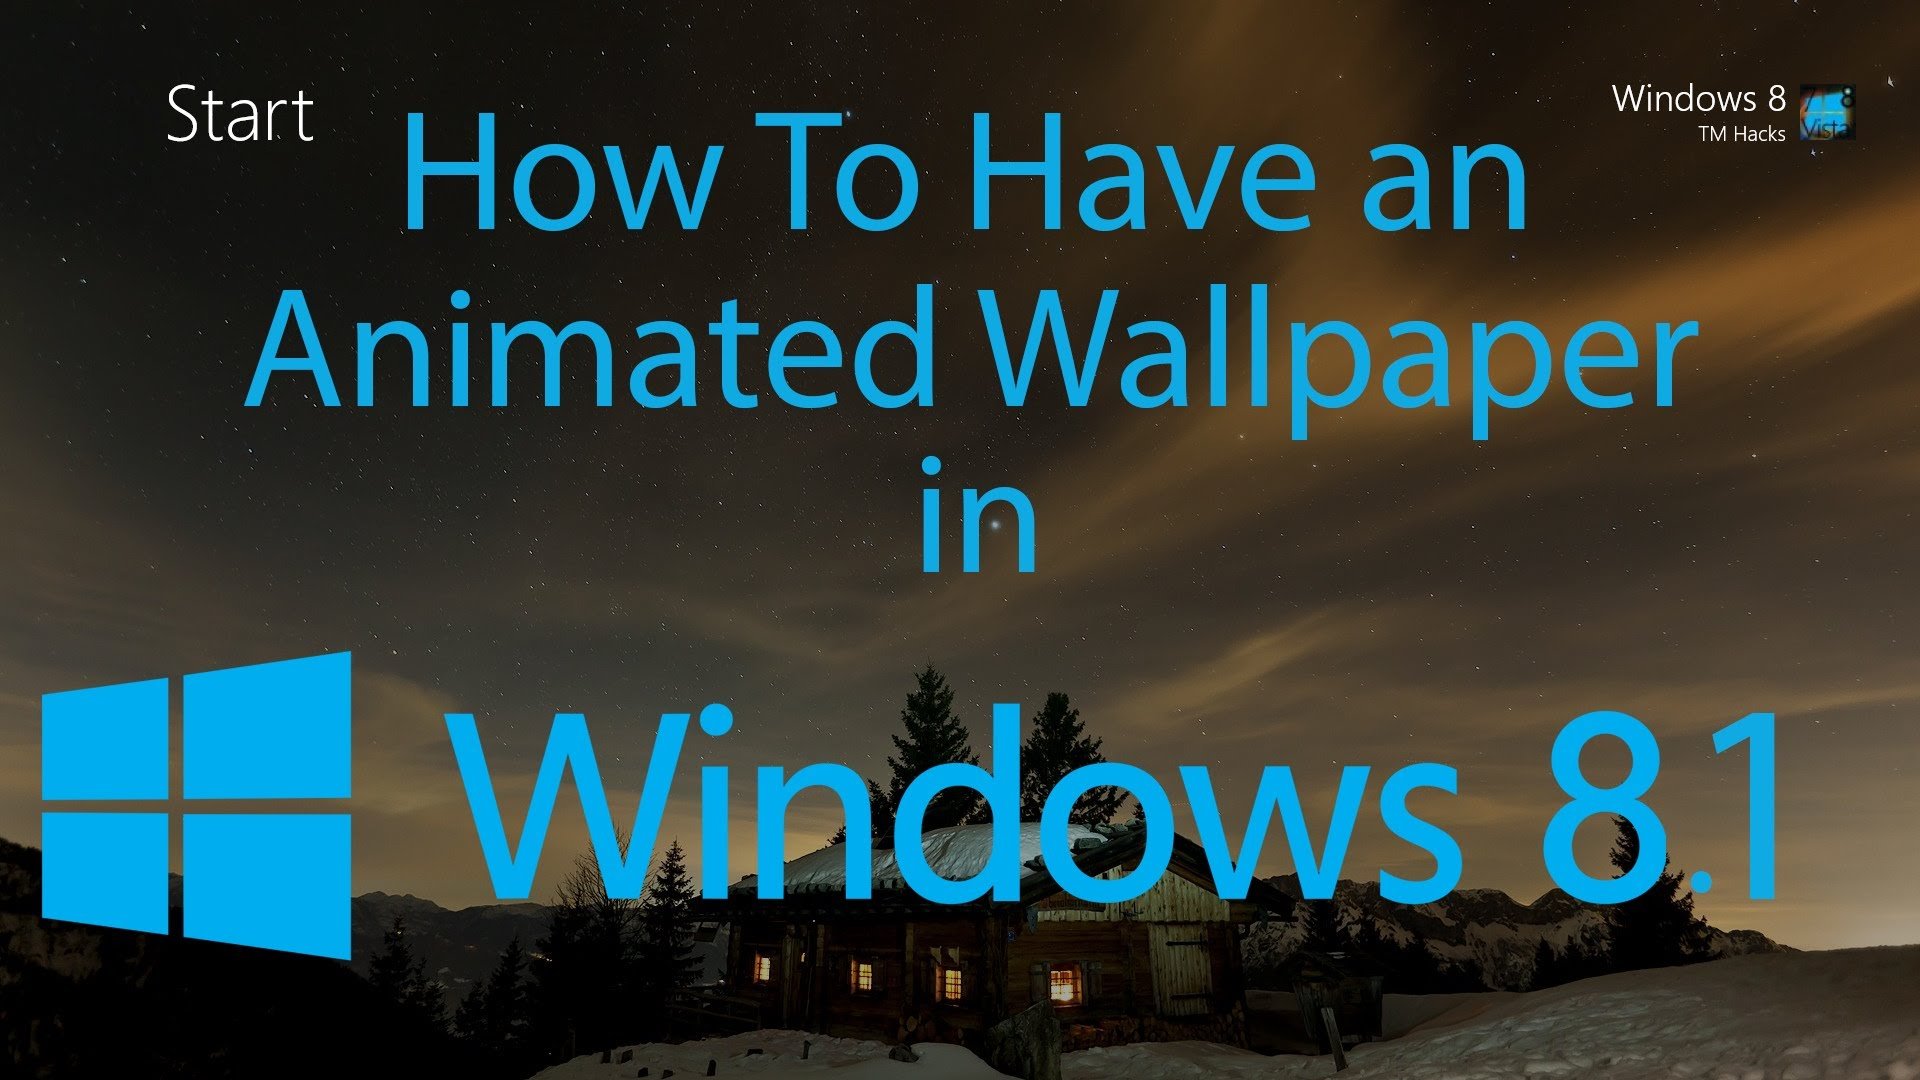 How To Have an Animated Wallpaper in Windows 81